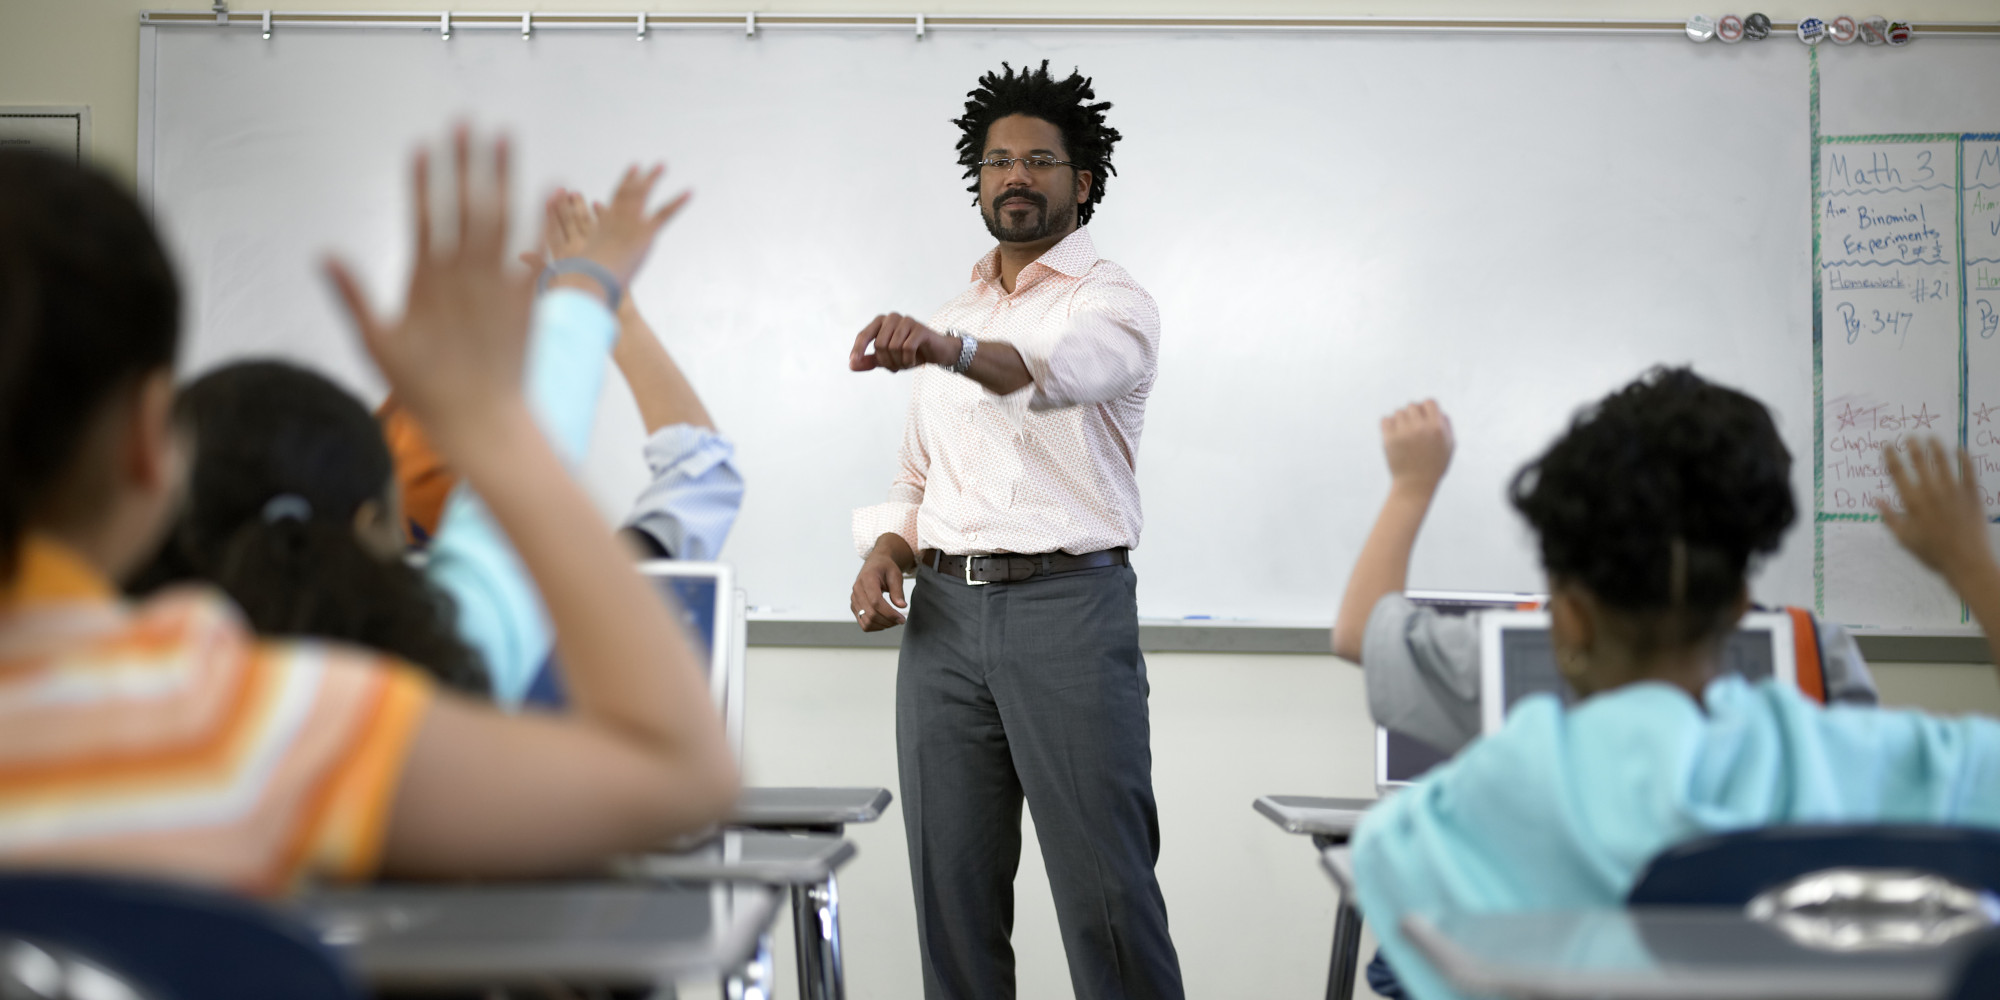 Male teacher standing before students (8-10) with hands raised